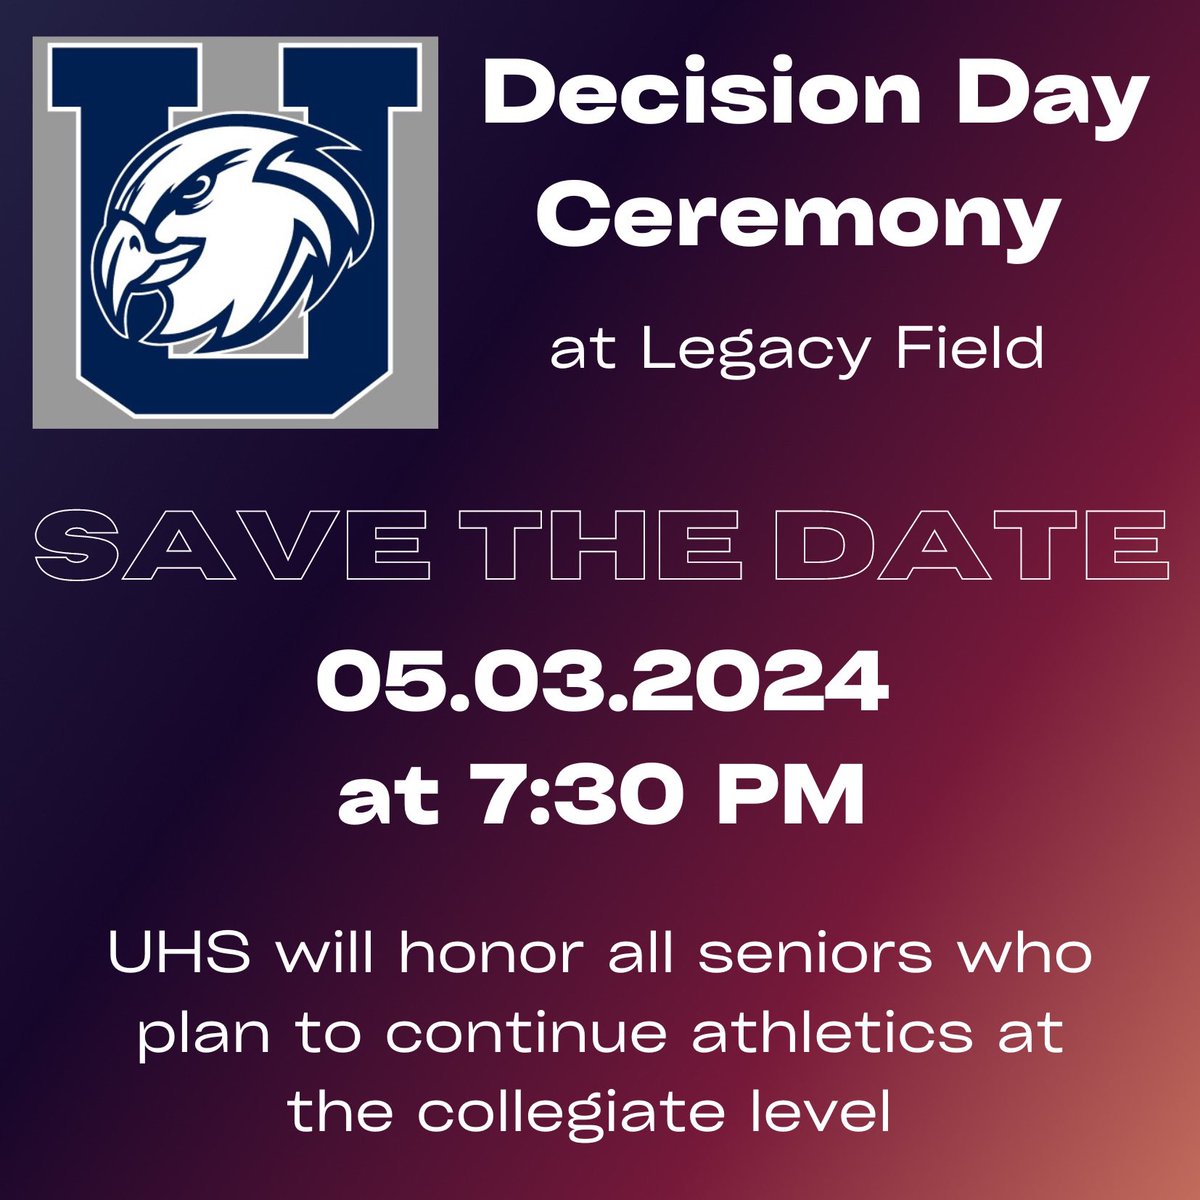 UHS Athletics and Ath Boosters will be hosting the Decision Day Ceremony for those seniors who intend to continue their athletic careers at the collegiate level next fall. Friday, May 3 at 7:30PM Legacy Field Come celebrate these AMAZING athletes! @UHS_FCPS @UHSBoosters